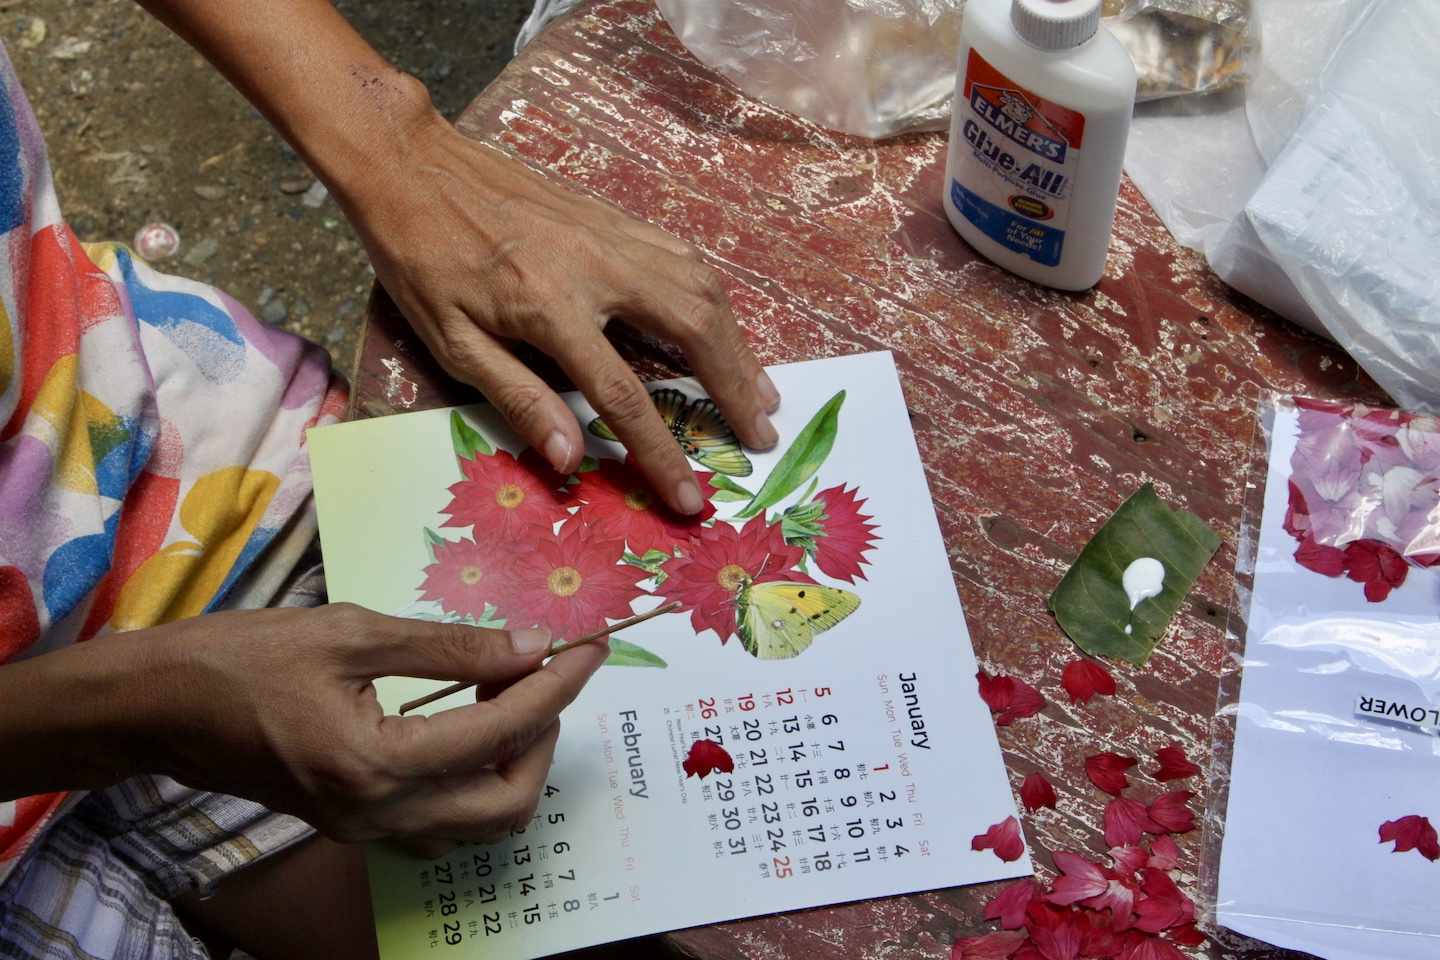 Susan has not only learned a new skill by participating in CCI's livelihood programme creating pressed flowers craft, she has also managed to supplement her household income through it.